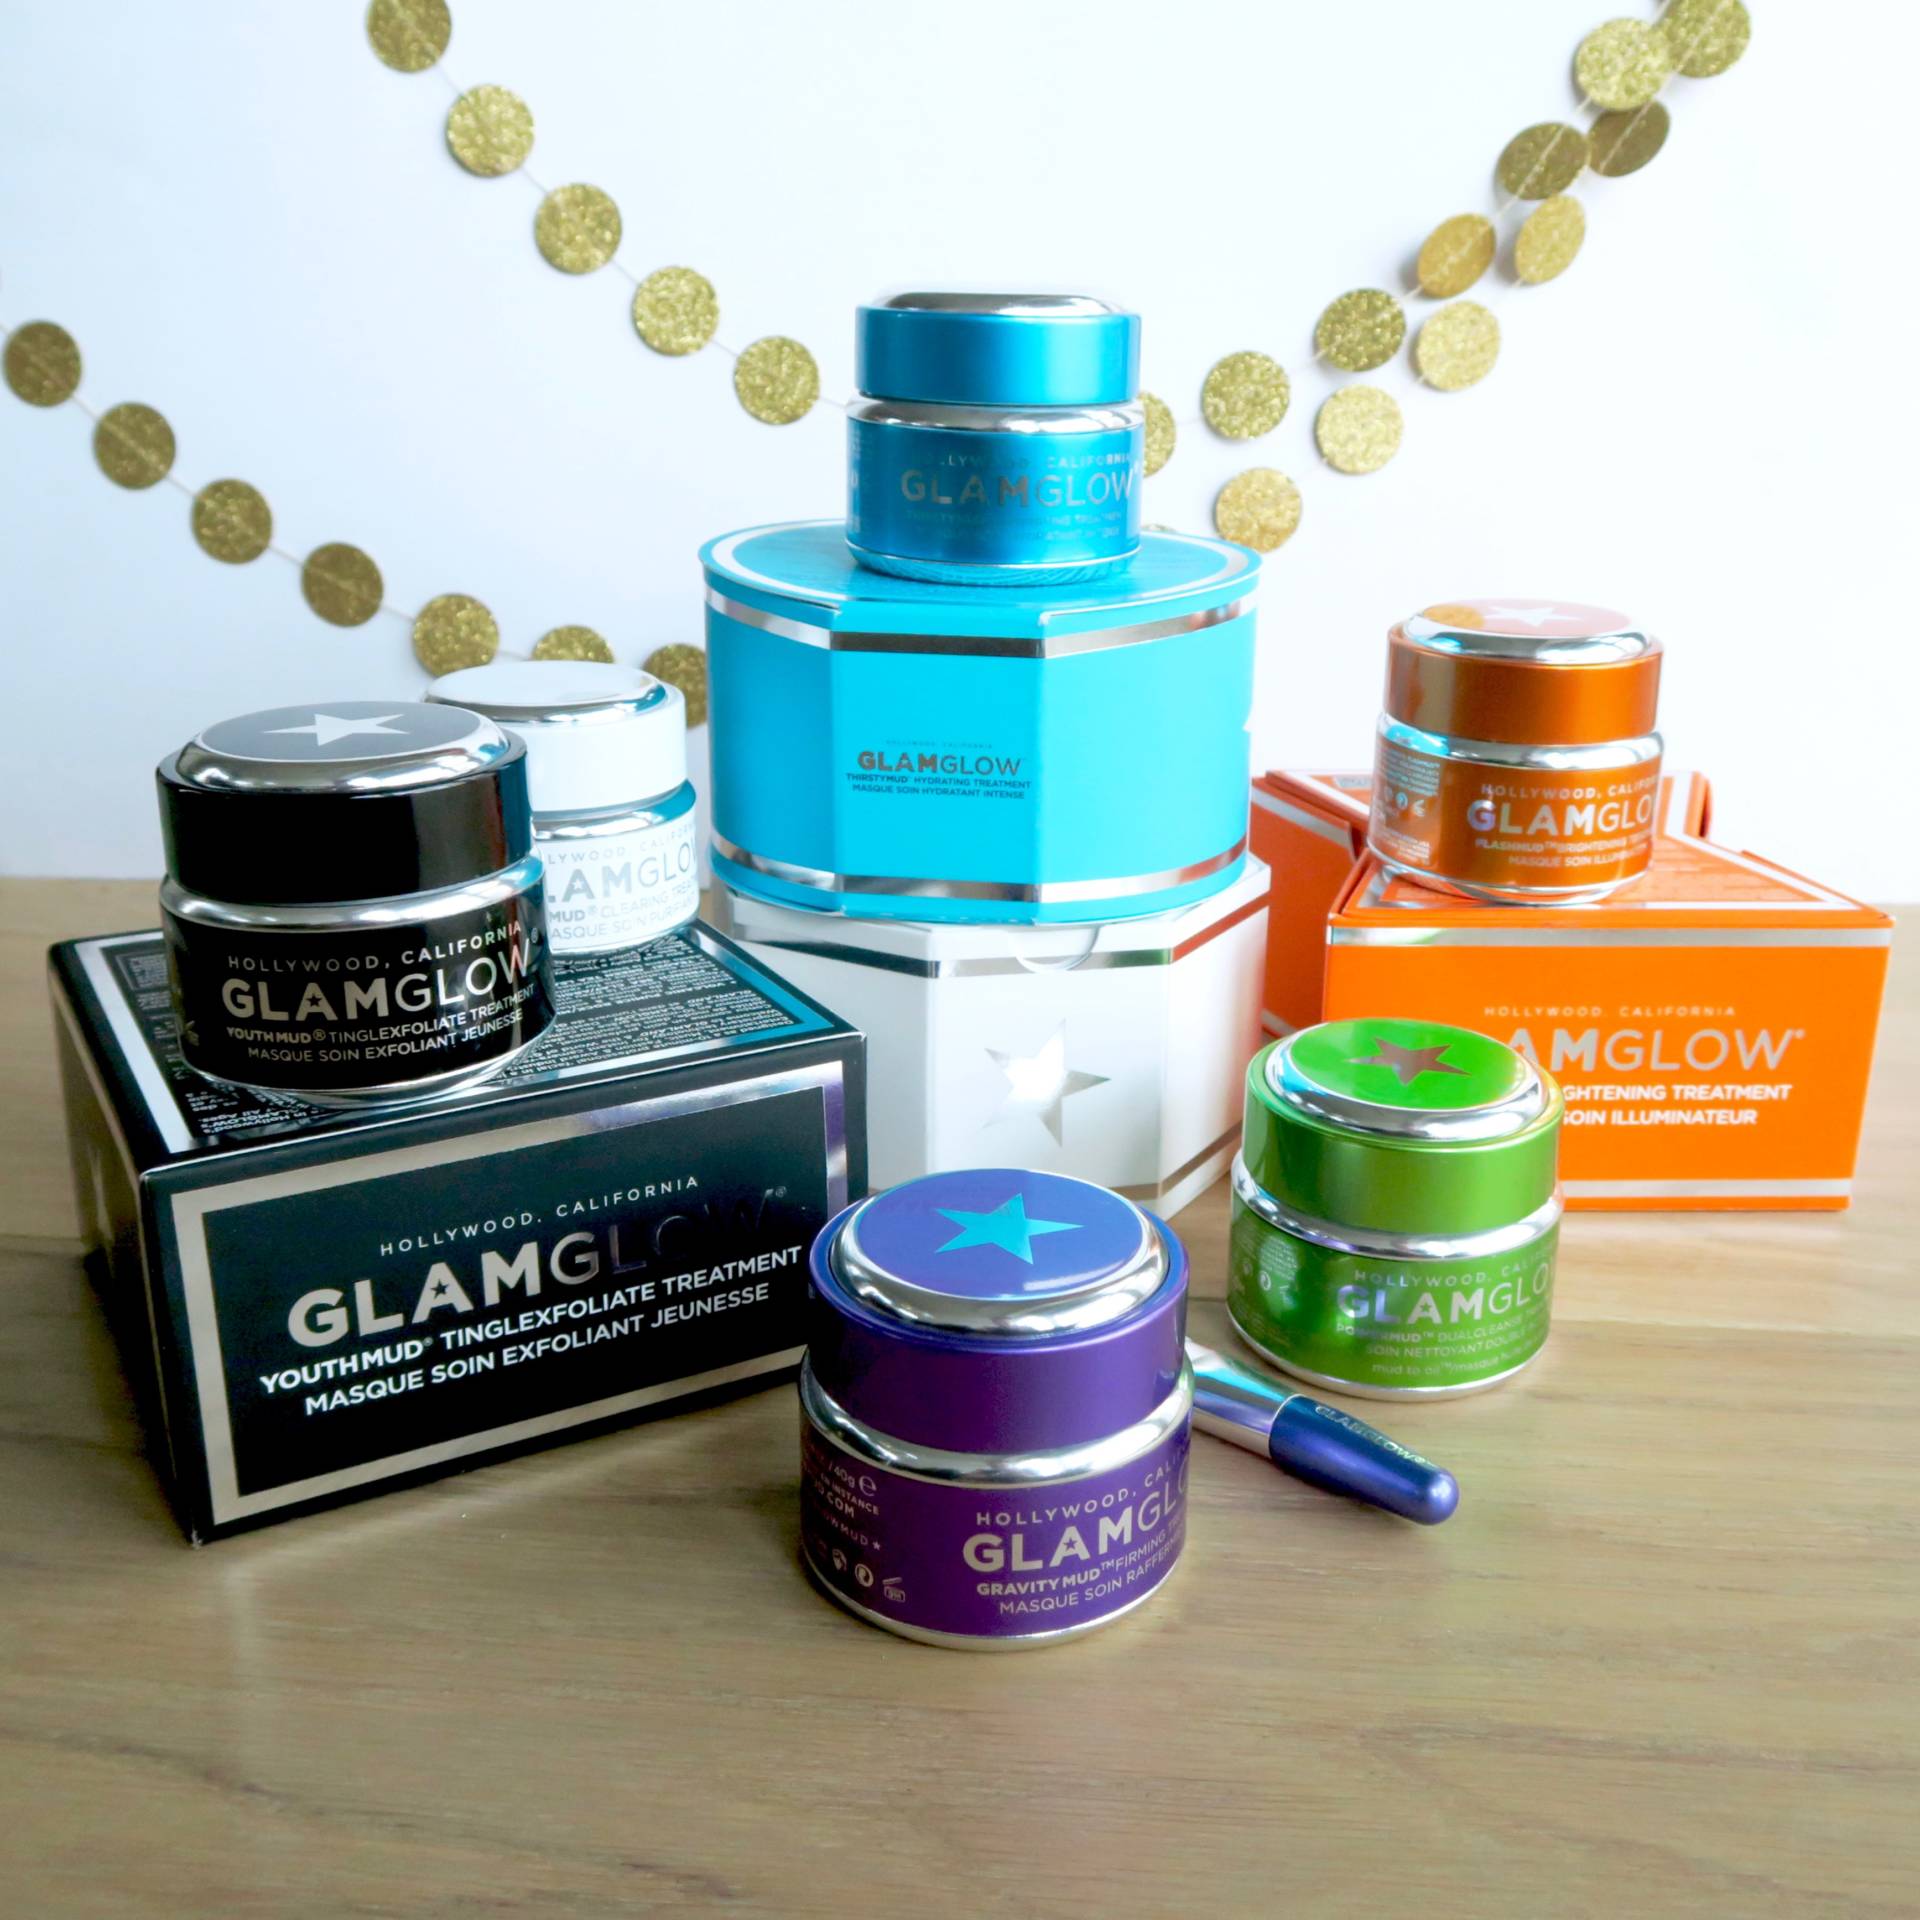 GLAMGLOW Face Mask Review